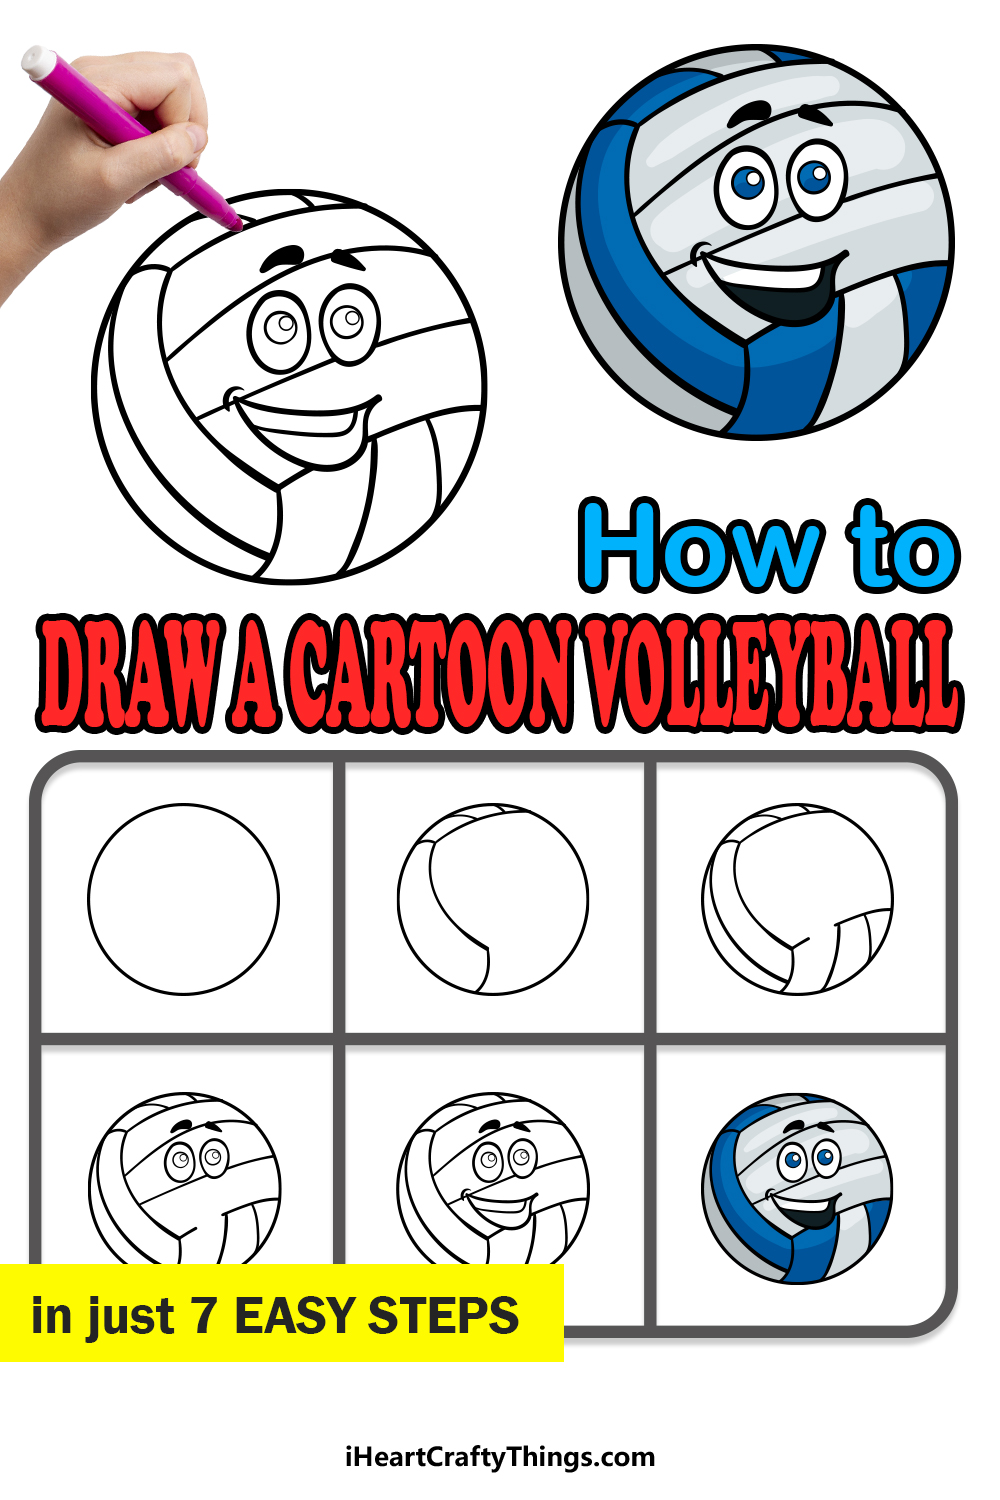 how to draw a cartoon volleyball in 7 easy steps